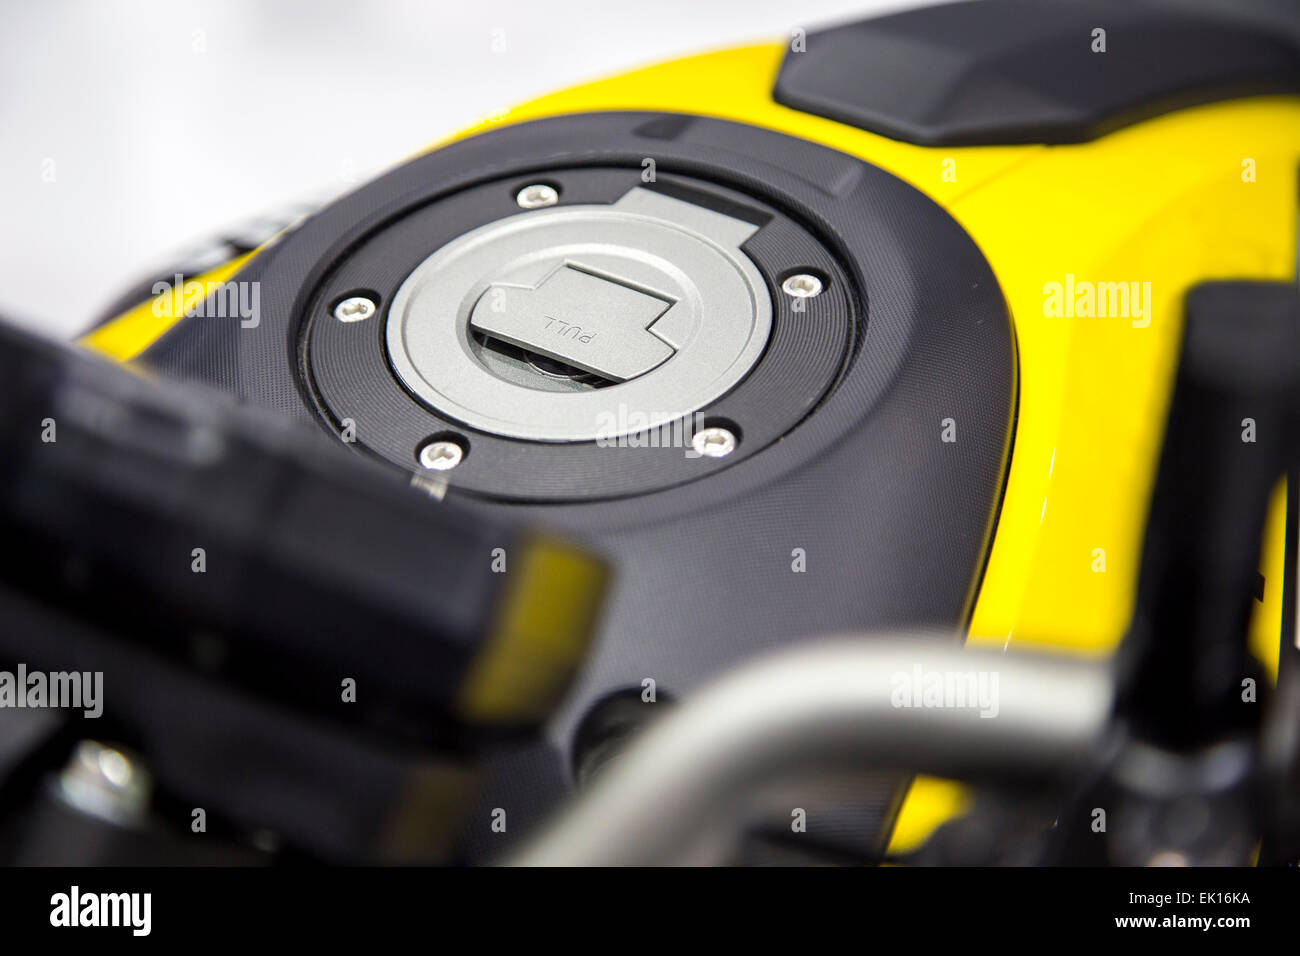 Close up shot of a yellow motorcycle fuel tank cover cap Stock Photo